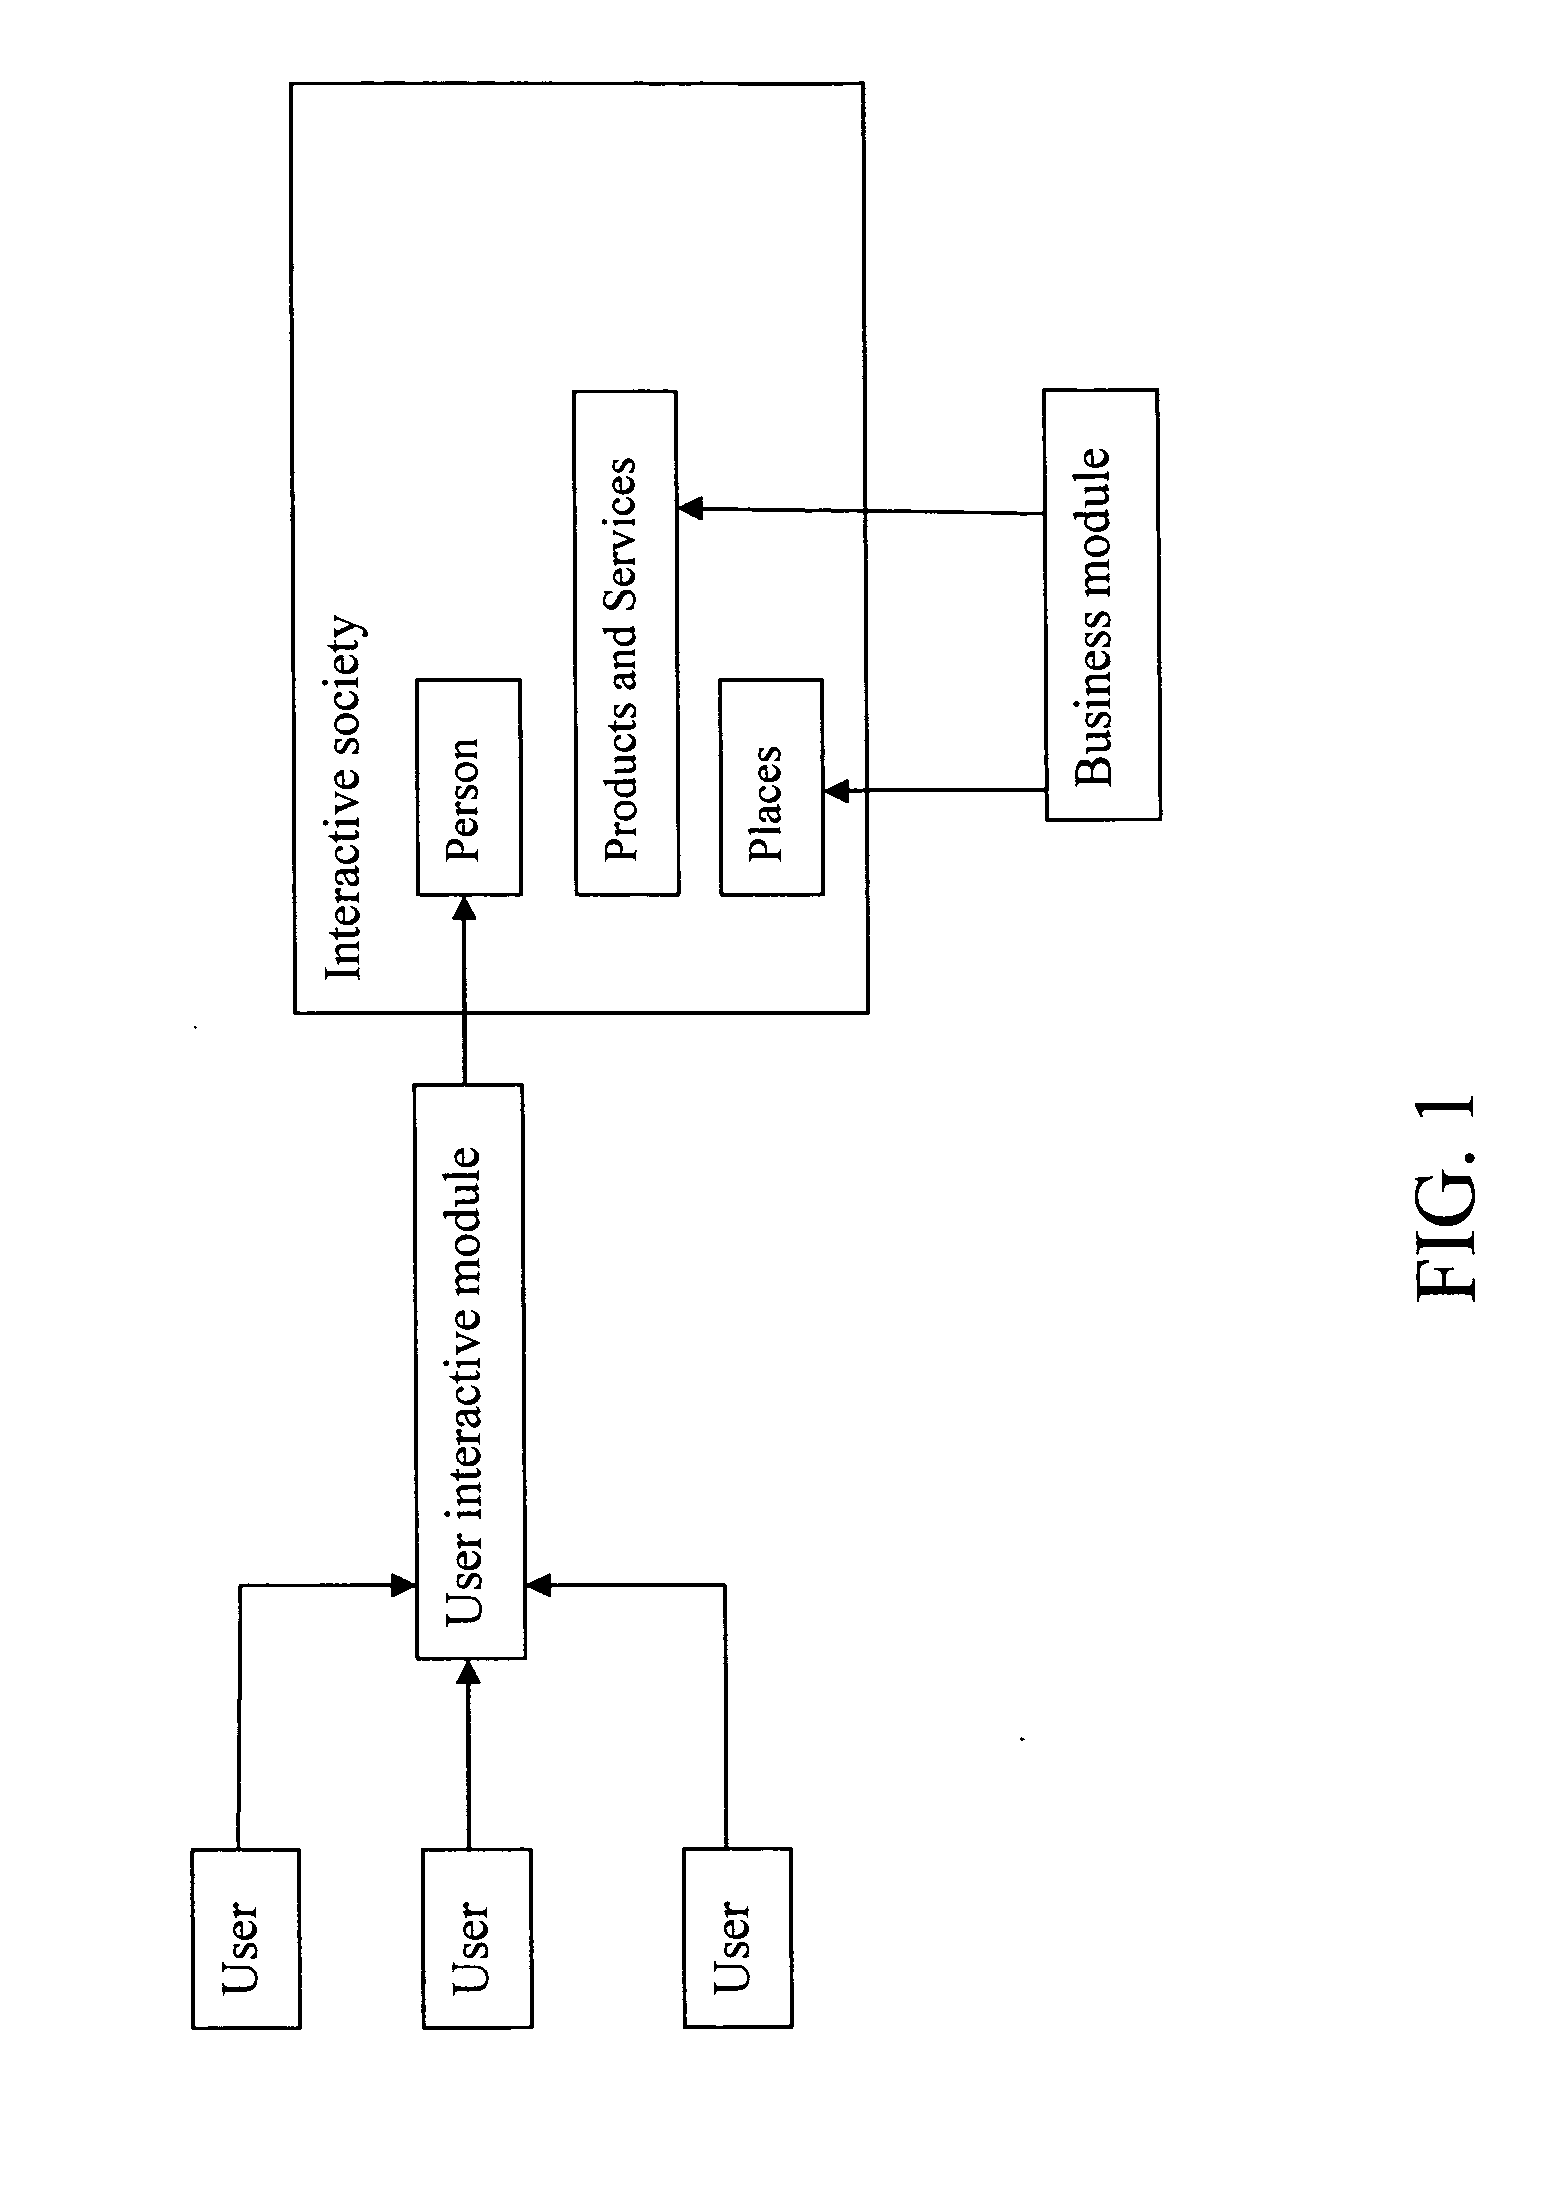 Interactive system and method of products, services, intelligent information and the like